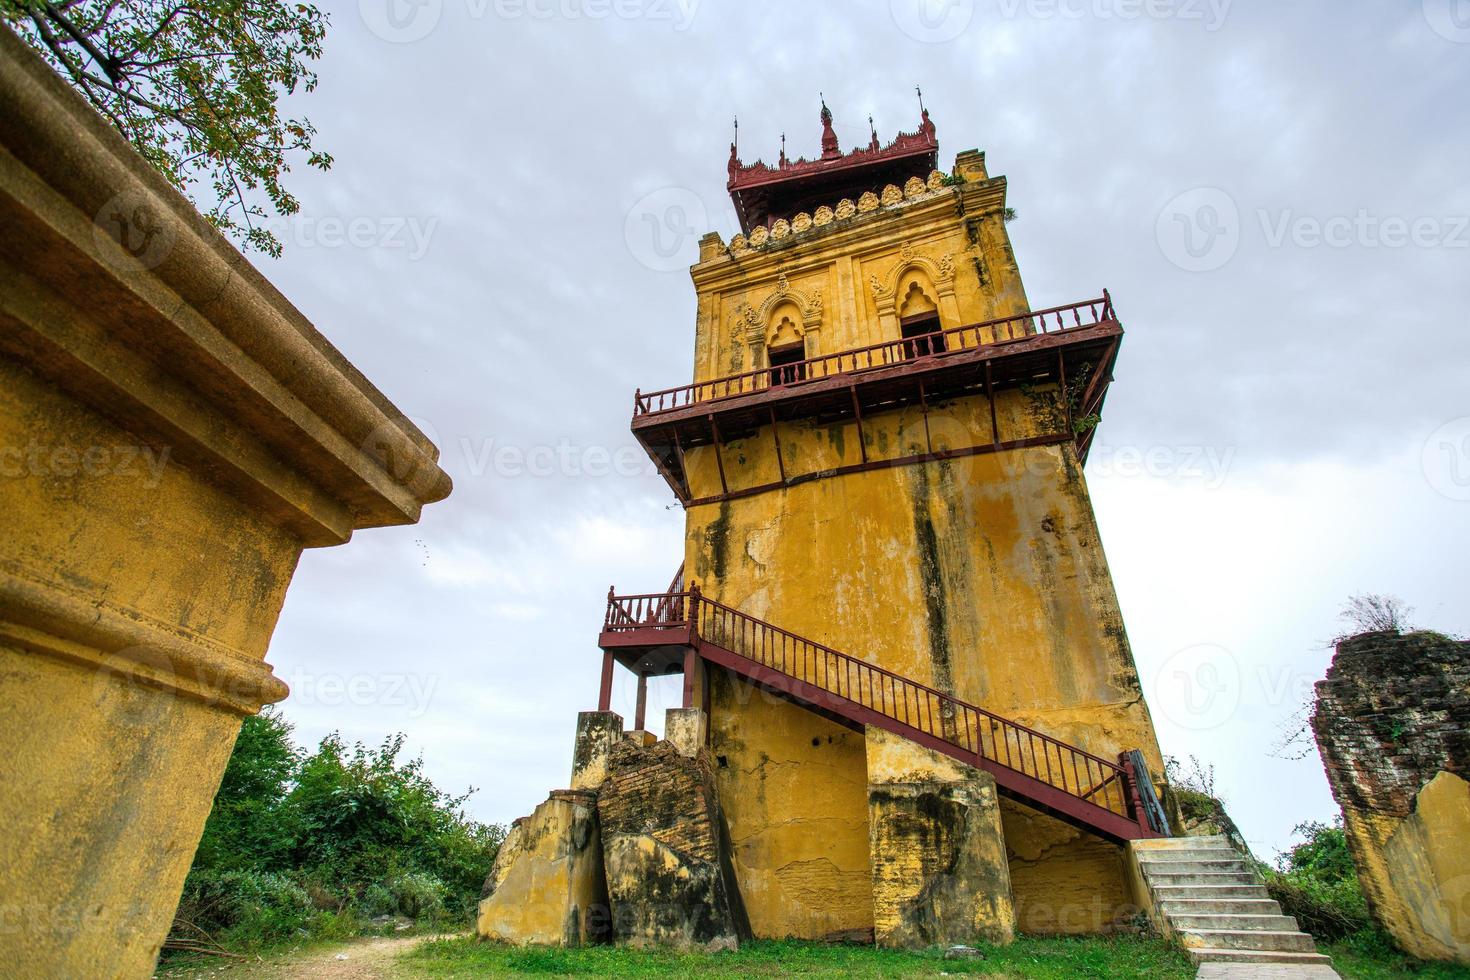 Nanmyin Watch Tower, or Leaning Tower of Inwa, the remains of the stately Palace reared by King Bagyidaw in Inwa, or Ava, Mandalay, Myanmar photo